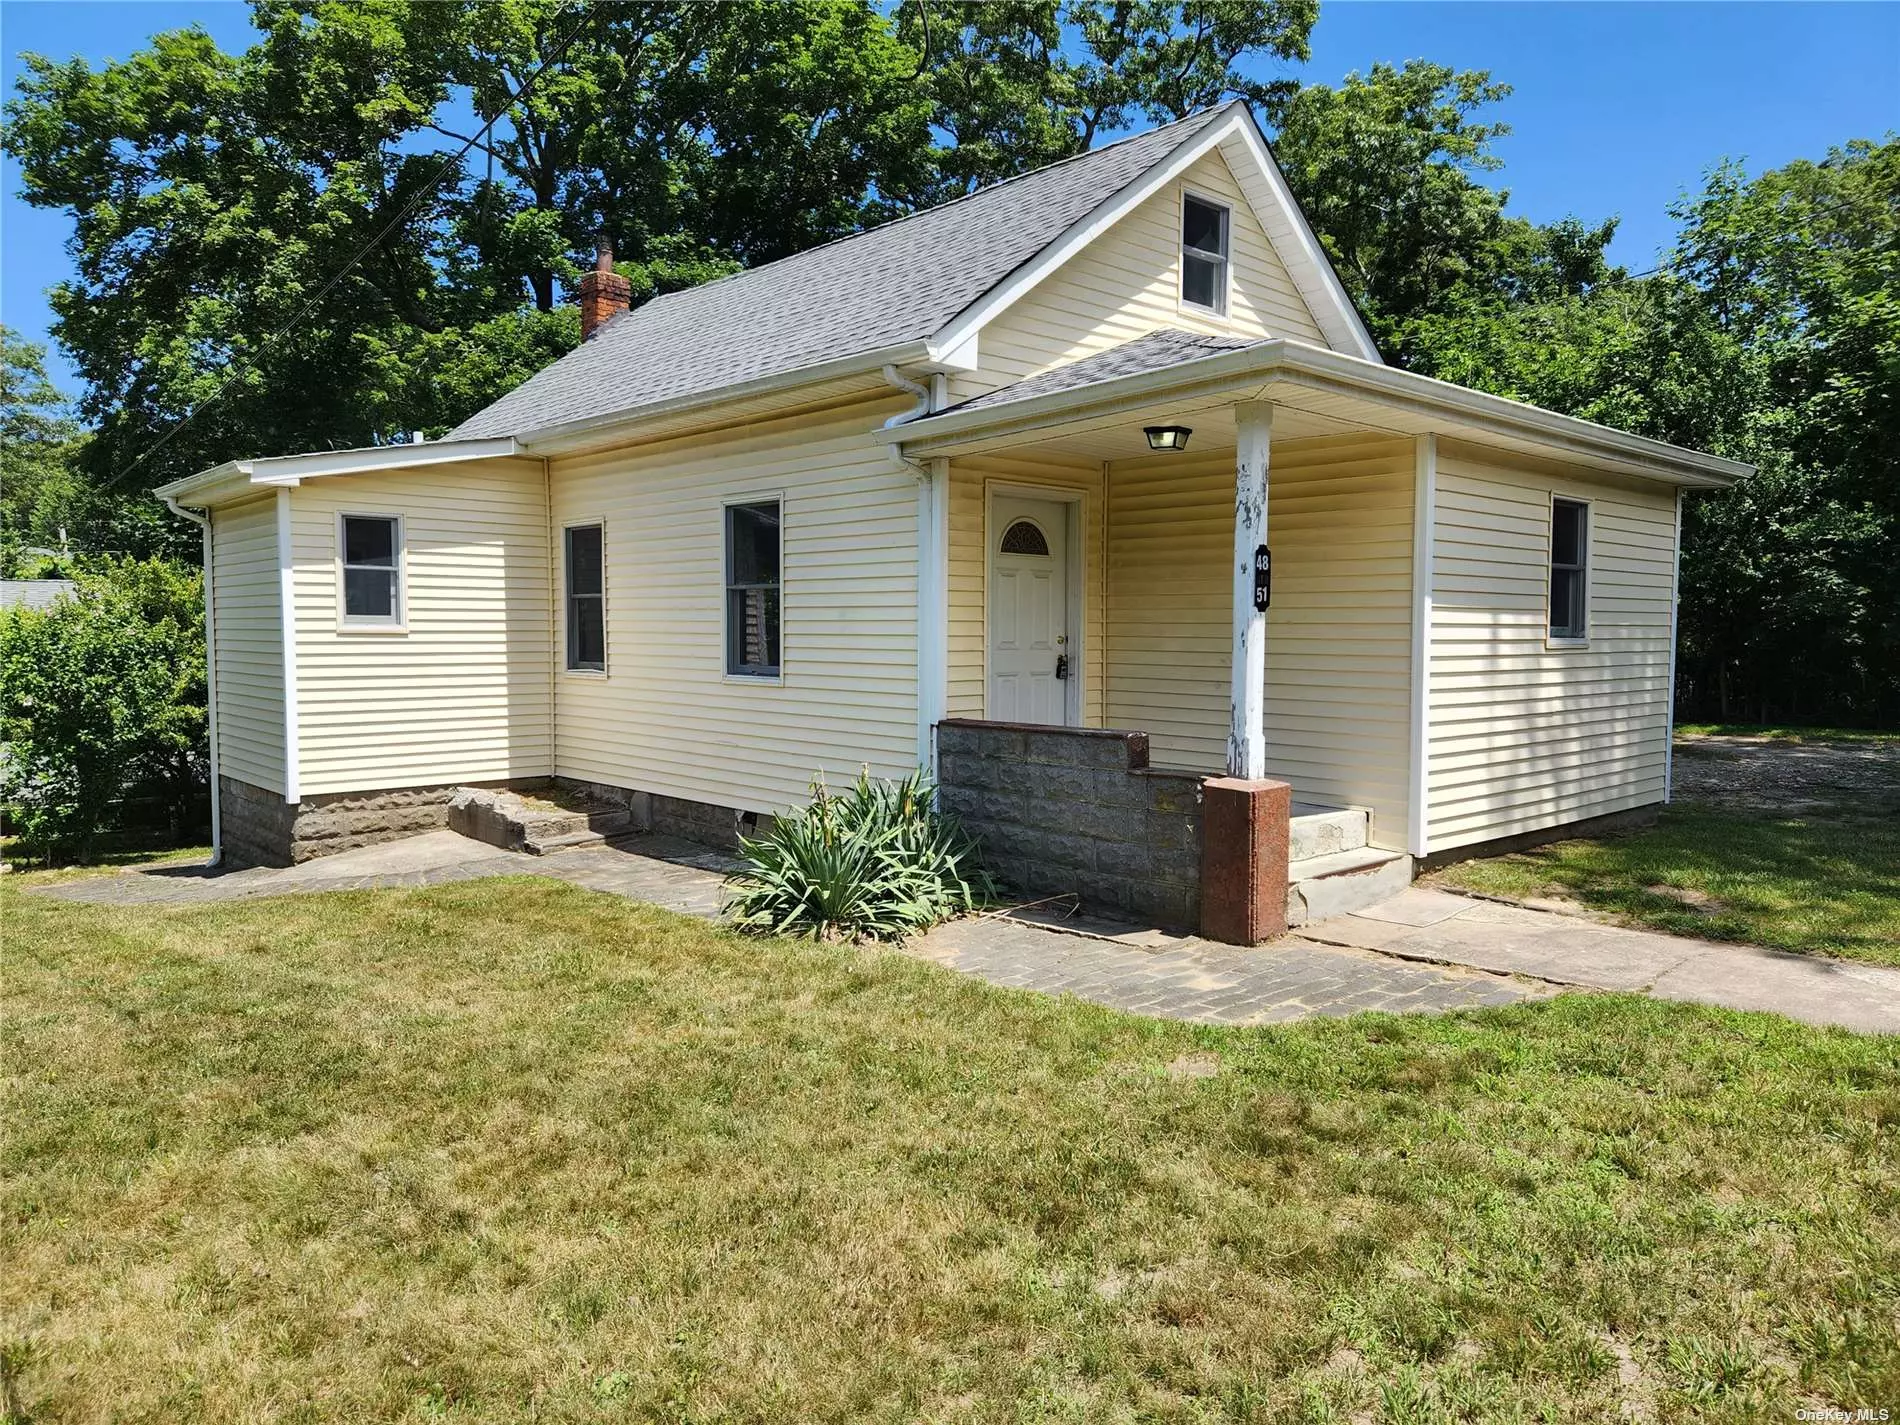 Excellent three bedroom house for rent. The home is located on a nice block in the Rocky Point School District and includes an unfinished basement for extra storage. Washer and Dryer hookups are also included.